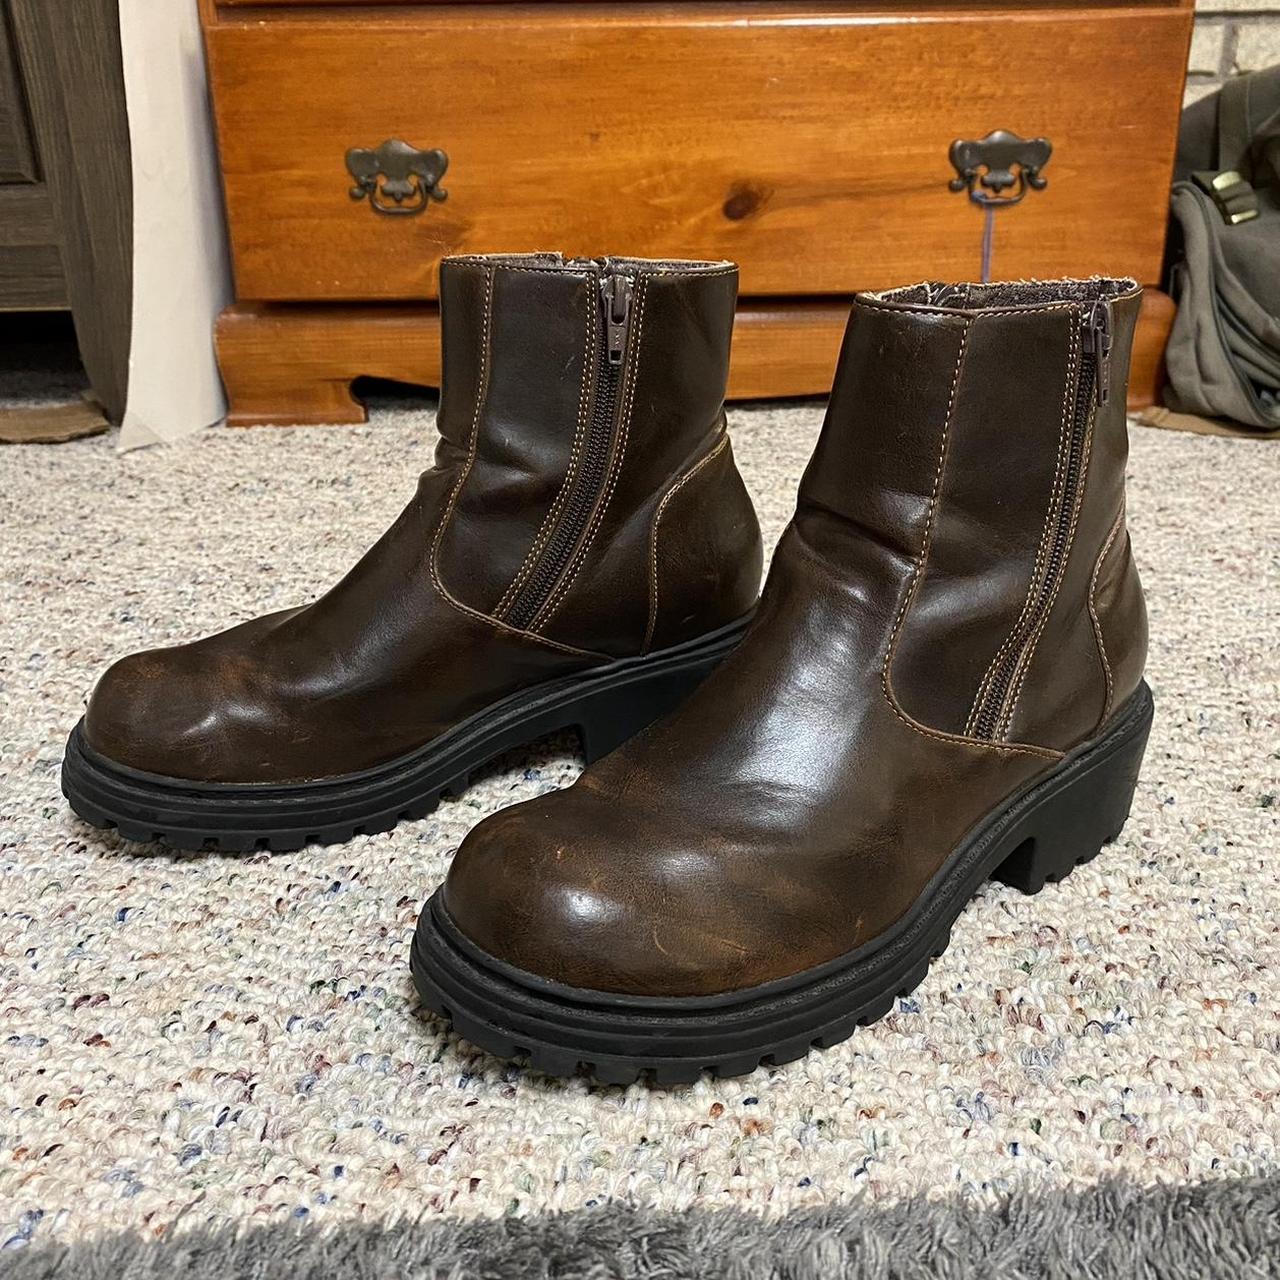 Union Bay Women's Brown and Black Boots | Depop